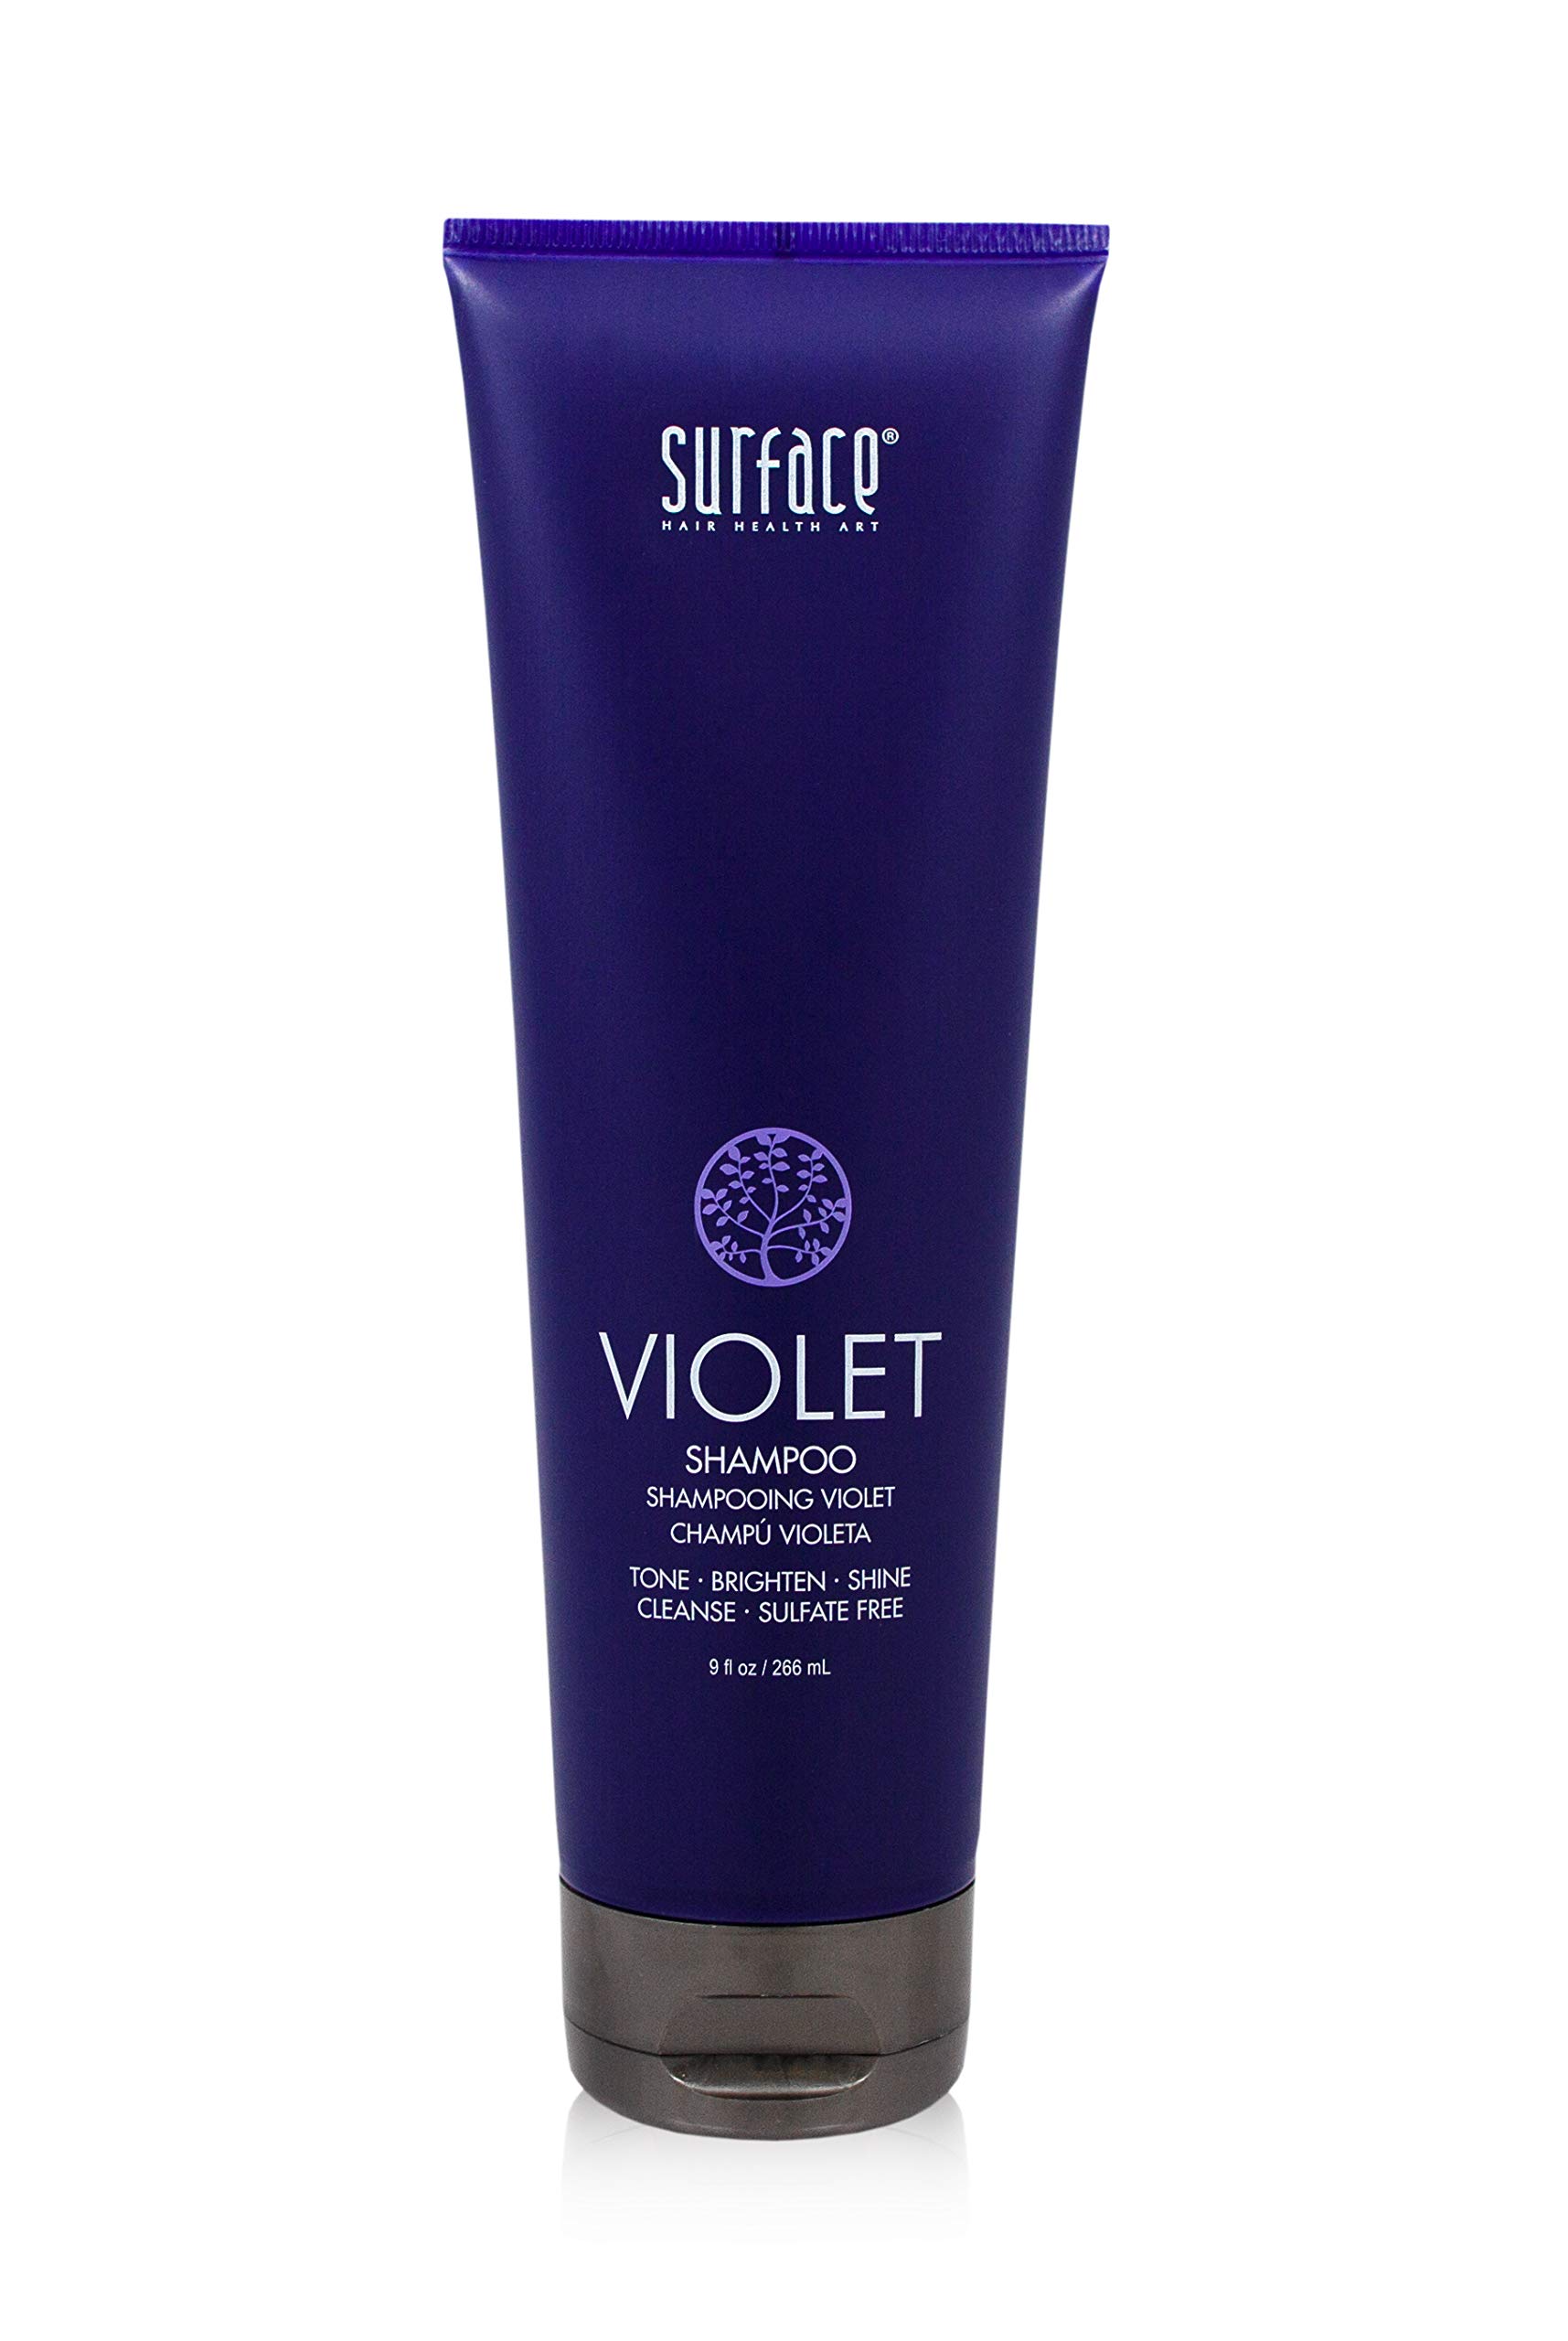 Surface Hair Pure Blonde Violet Shampoo: Purple Shampoo for Blonde Hair, Eliminates Brassy Yellow Tones, Lightens Blonde, Platinum, Ash, Silver and Grays, Paraben and Sulfate-Free